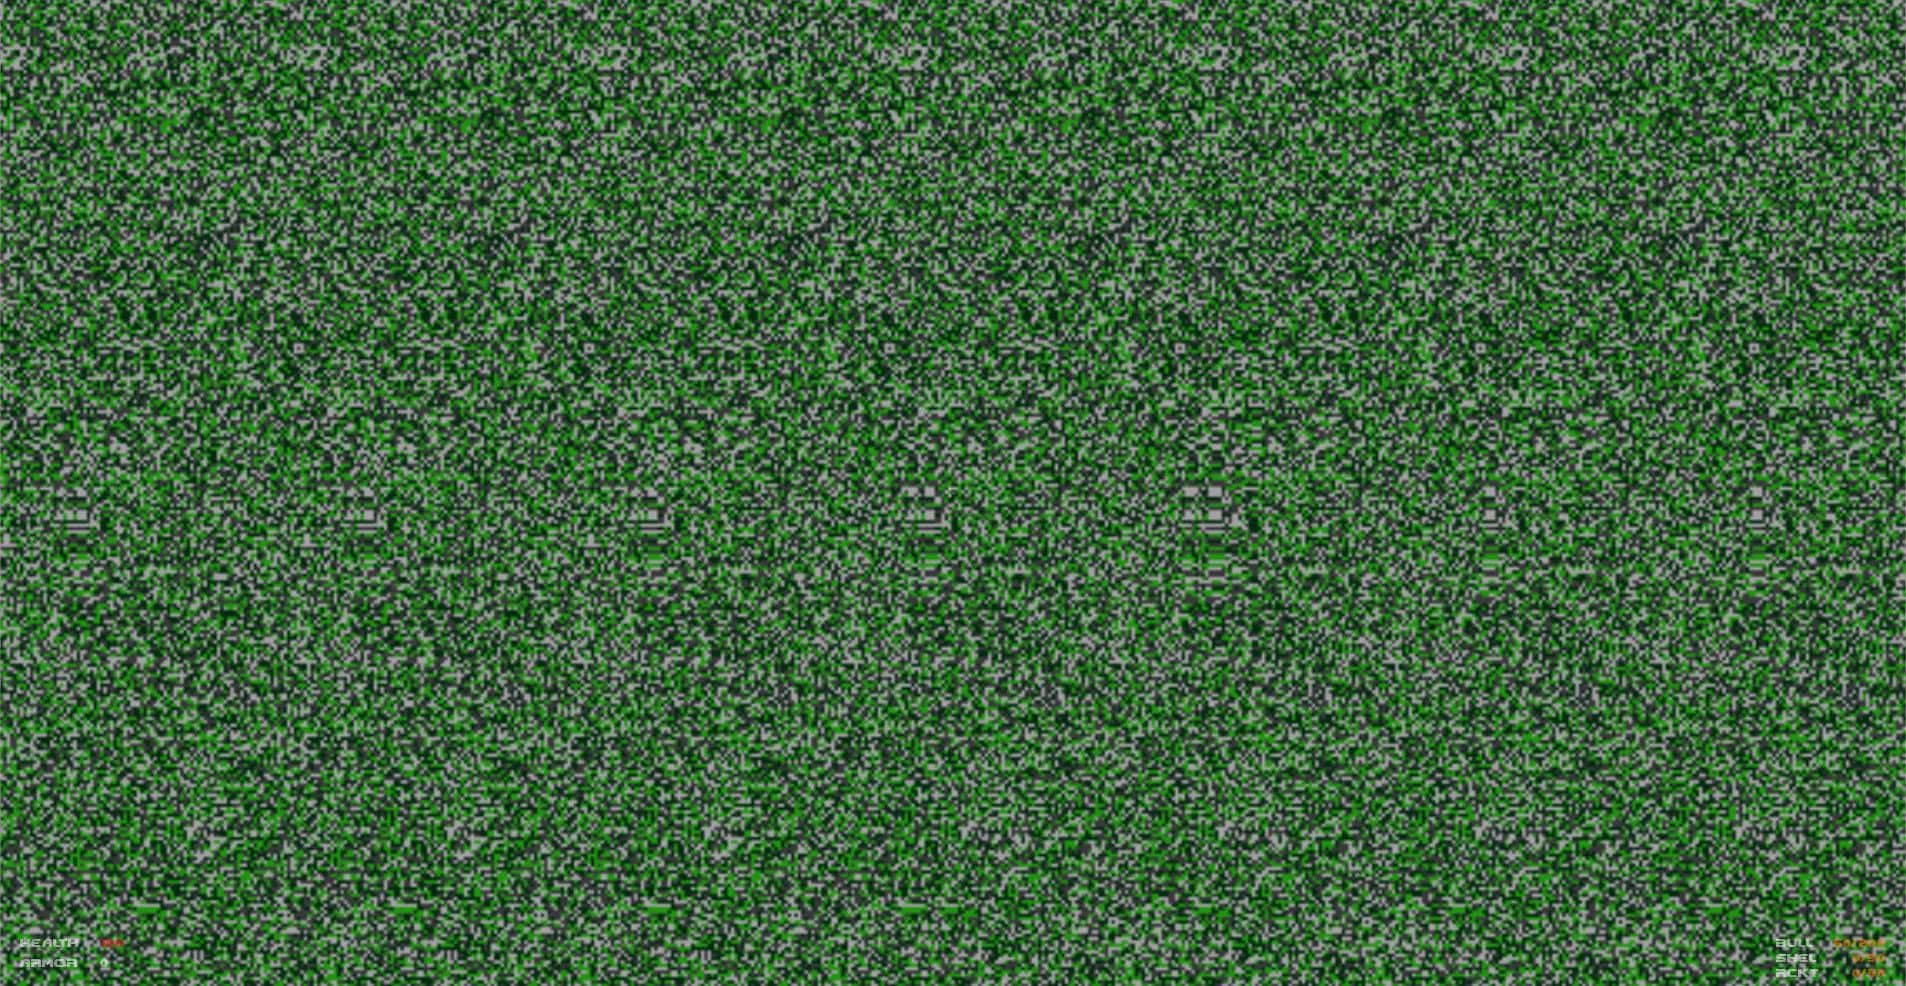 A Green Grass Texture With A Lot Of Small Dots